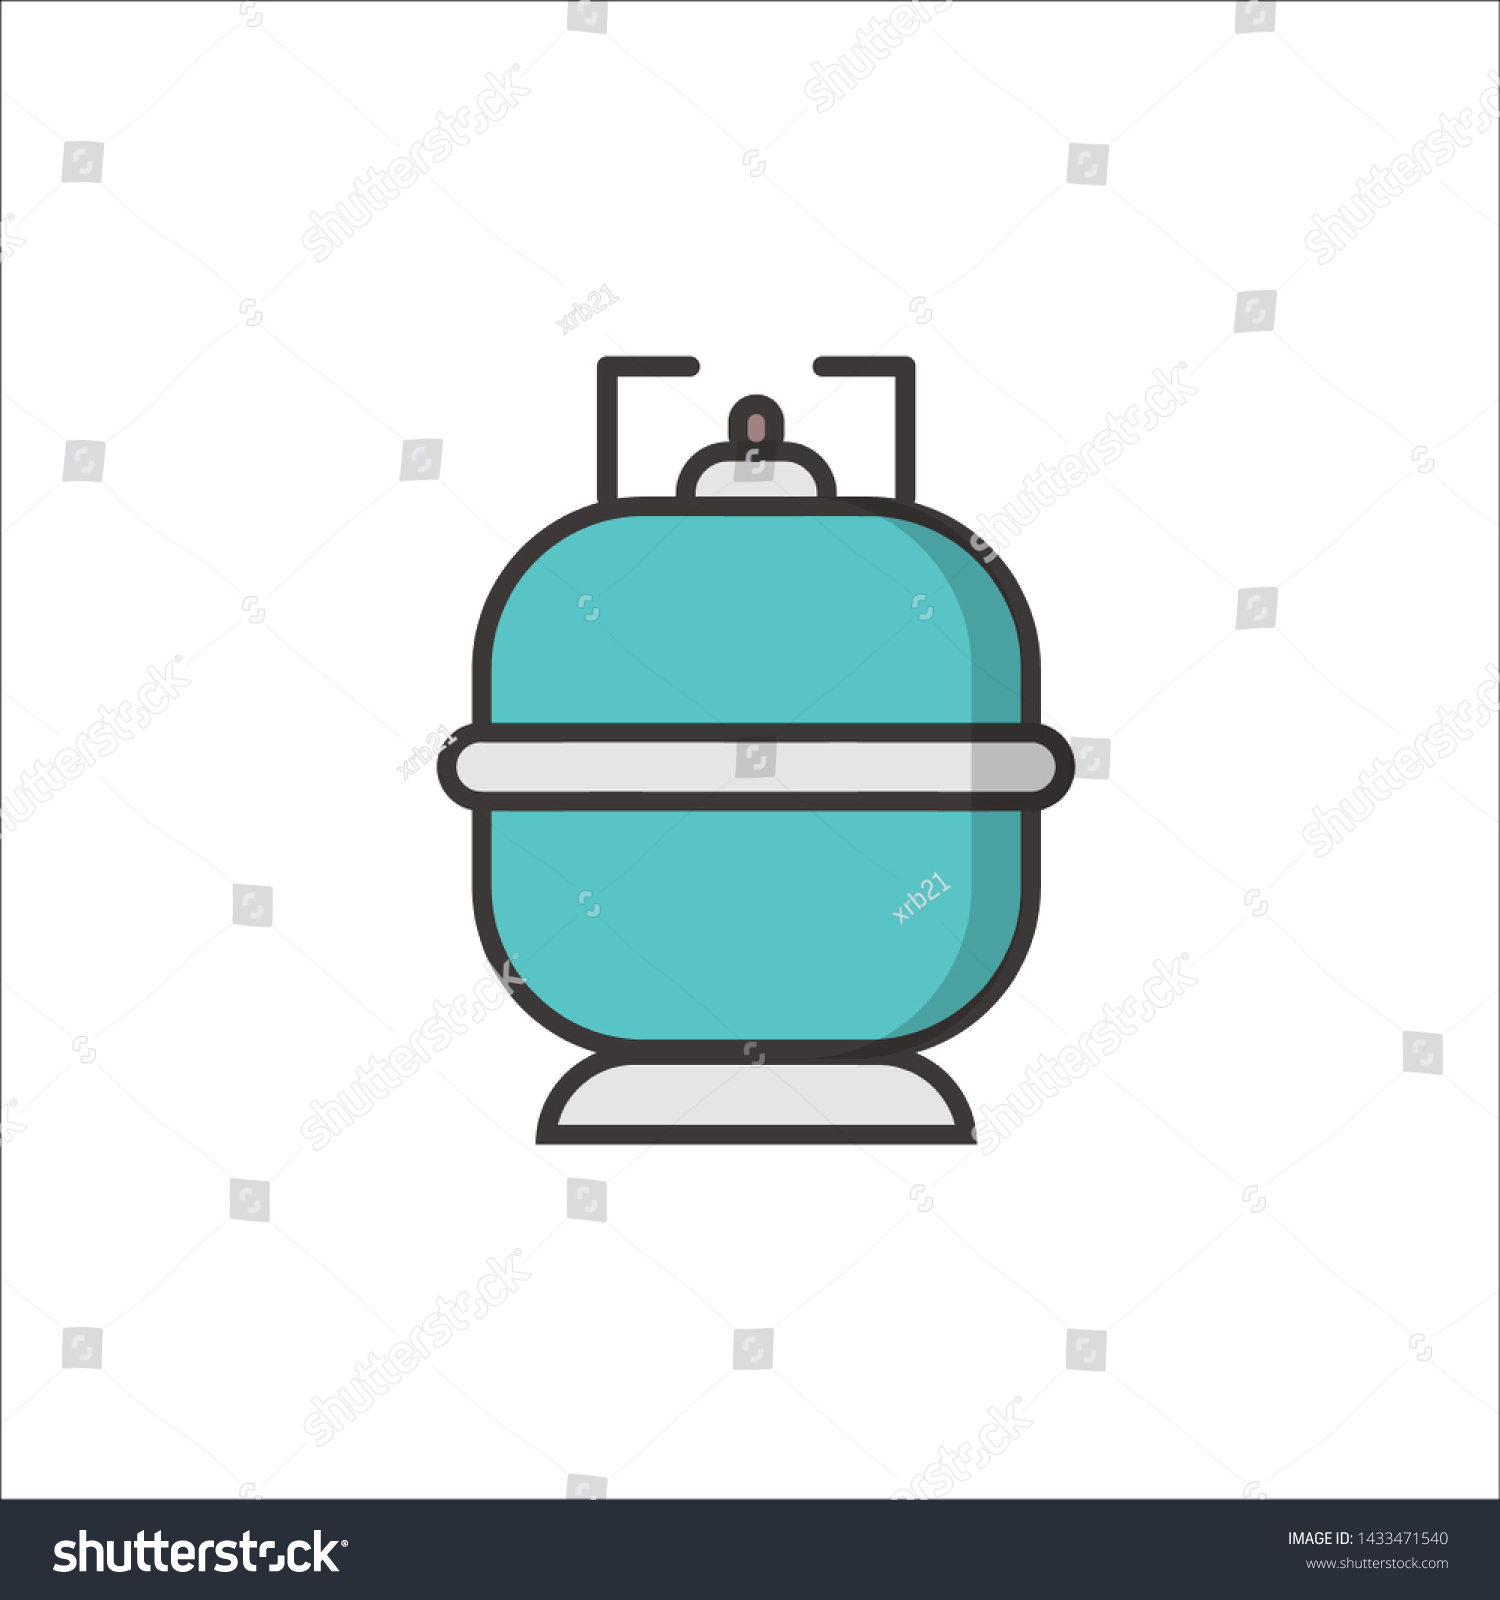 4 Tabung Stock Illustrations, Images & Vectors | Shutterstock